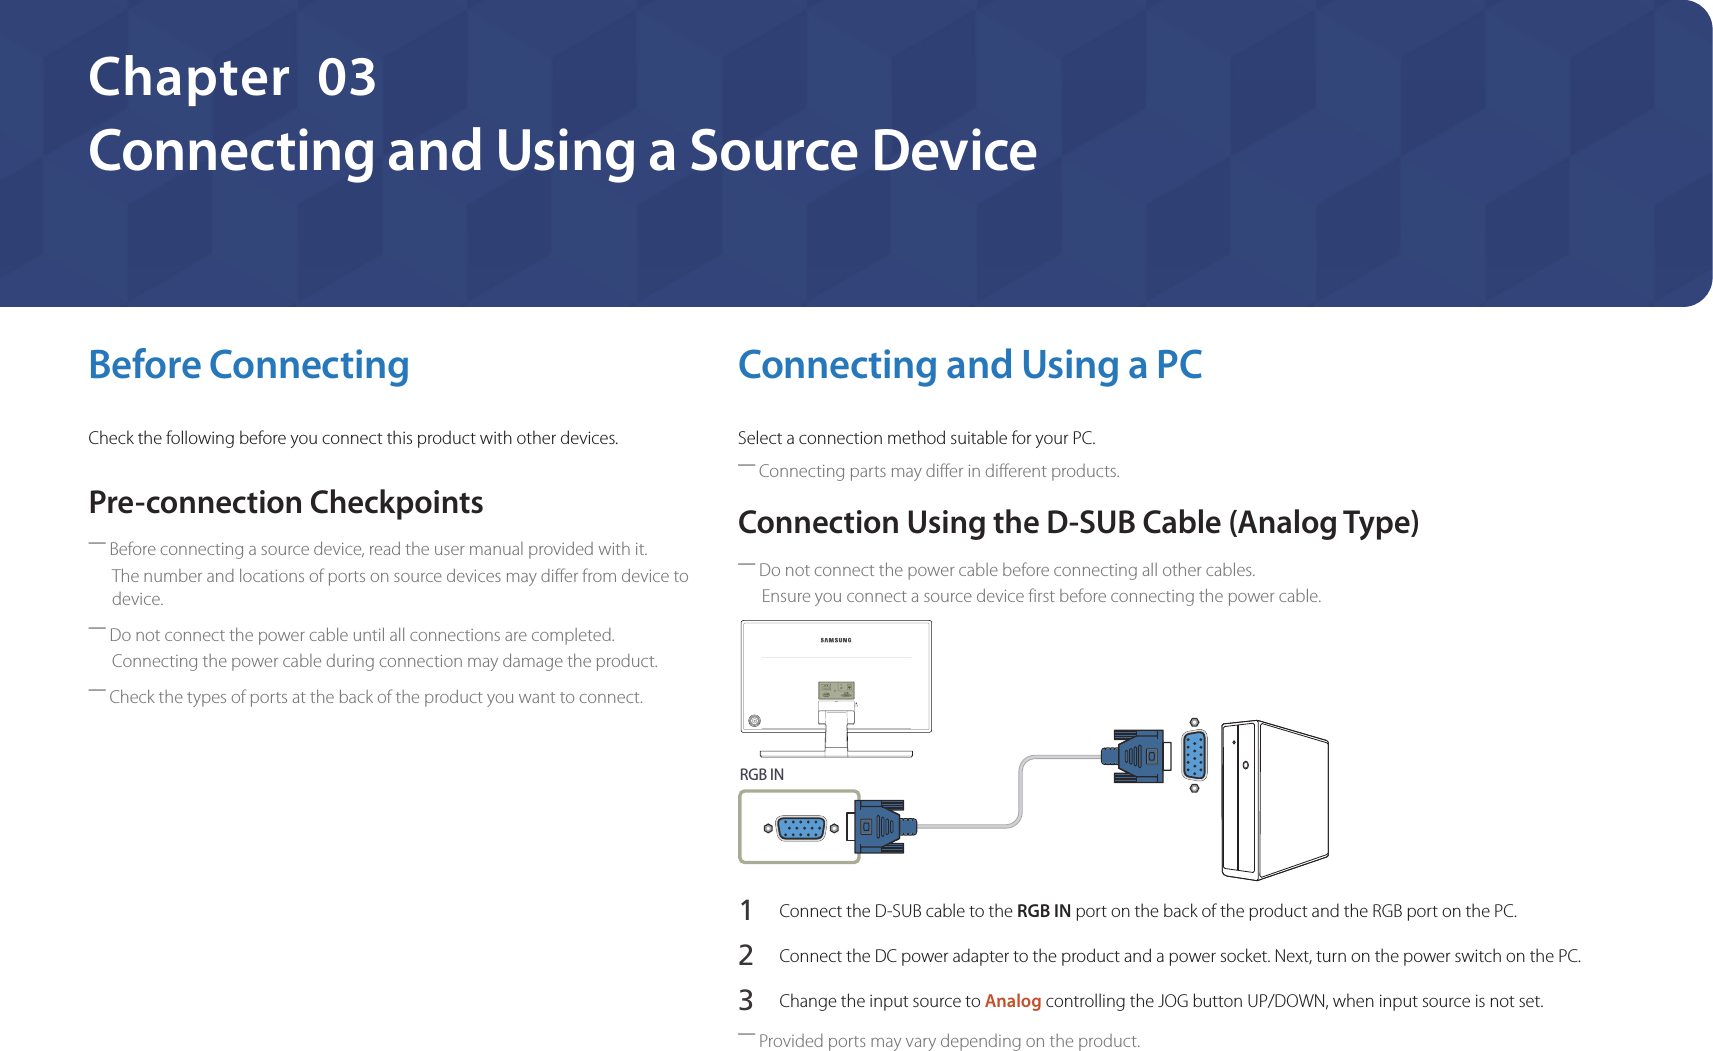 22Connecting and Using a Source DeviceChapter  03Before ConnectingCheck the following before you connect this product with other devices.Pre-connection Checkpoints ―Before connecting a source device, read the user manual provided with it.The number and locations of ports on source devices may differ from device to device. ―Do not connect the power cable until all connections are completed.Connecting the power cable during connection may damage the product. ―Check the types of ports at the back of the product you want to connect.Connecting and Using a PCSelect a connection method suitable for your PC. ―Connecting parts may differ in different products.Connection Using the D-SUB Cable (Analog Type) ―Do not connect the power cable before connecting all other cables.Ensure you connect a source device first before connecting the power cable.RGB IN1 Connect the D-SUB cable to the RGB IN port on the back of the product and the RGB port on the PC.2 Connect the DC power adapter to the product and a power socket. Next, turn on the power switch on the PC.3 Change the input source to Analog controlling the JOG button UP/DOWN, when input source is not set. ―Provided ports may vary depending on the product.